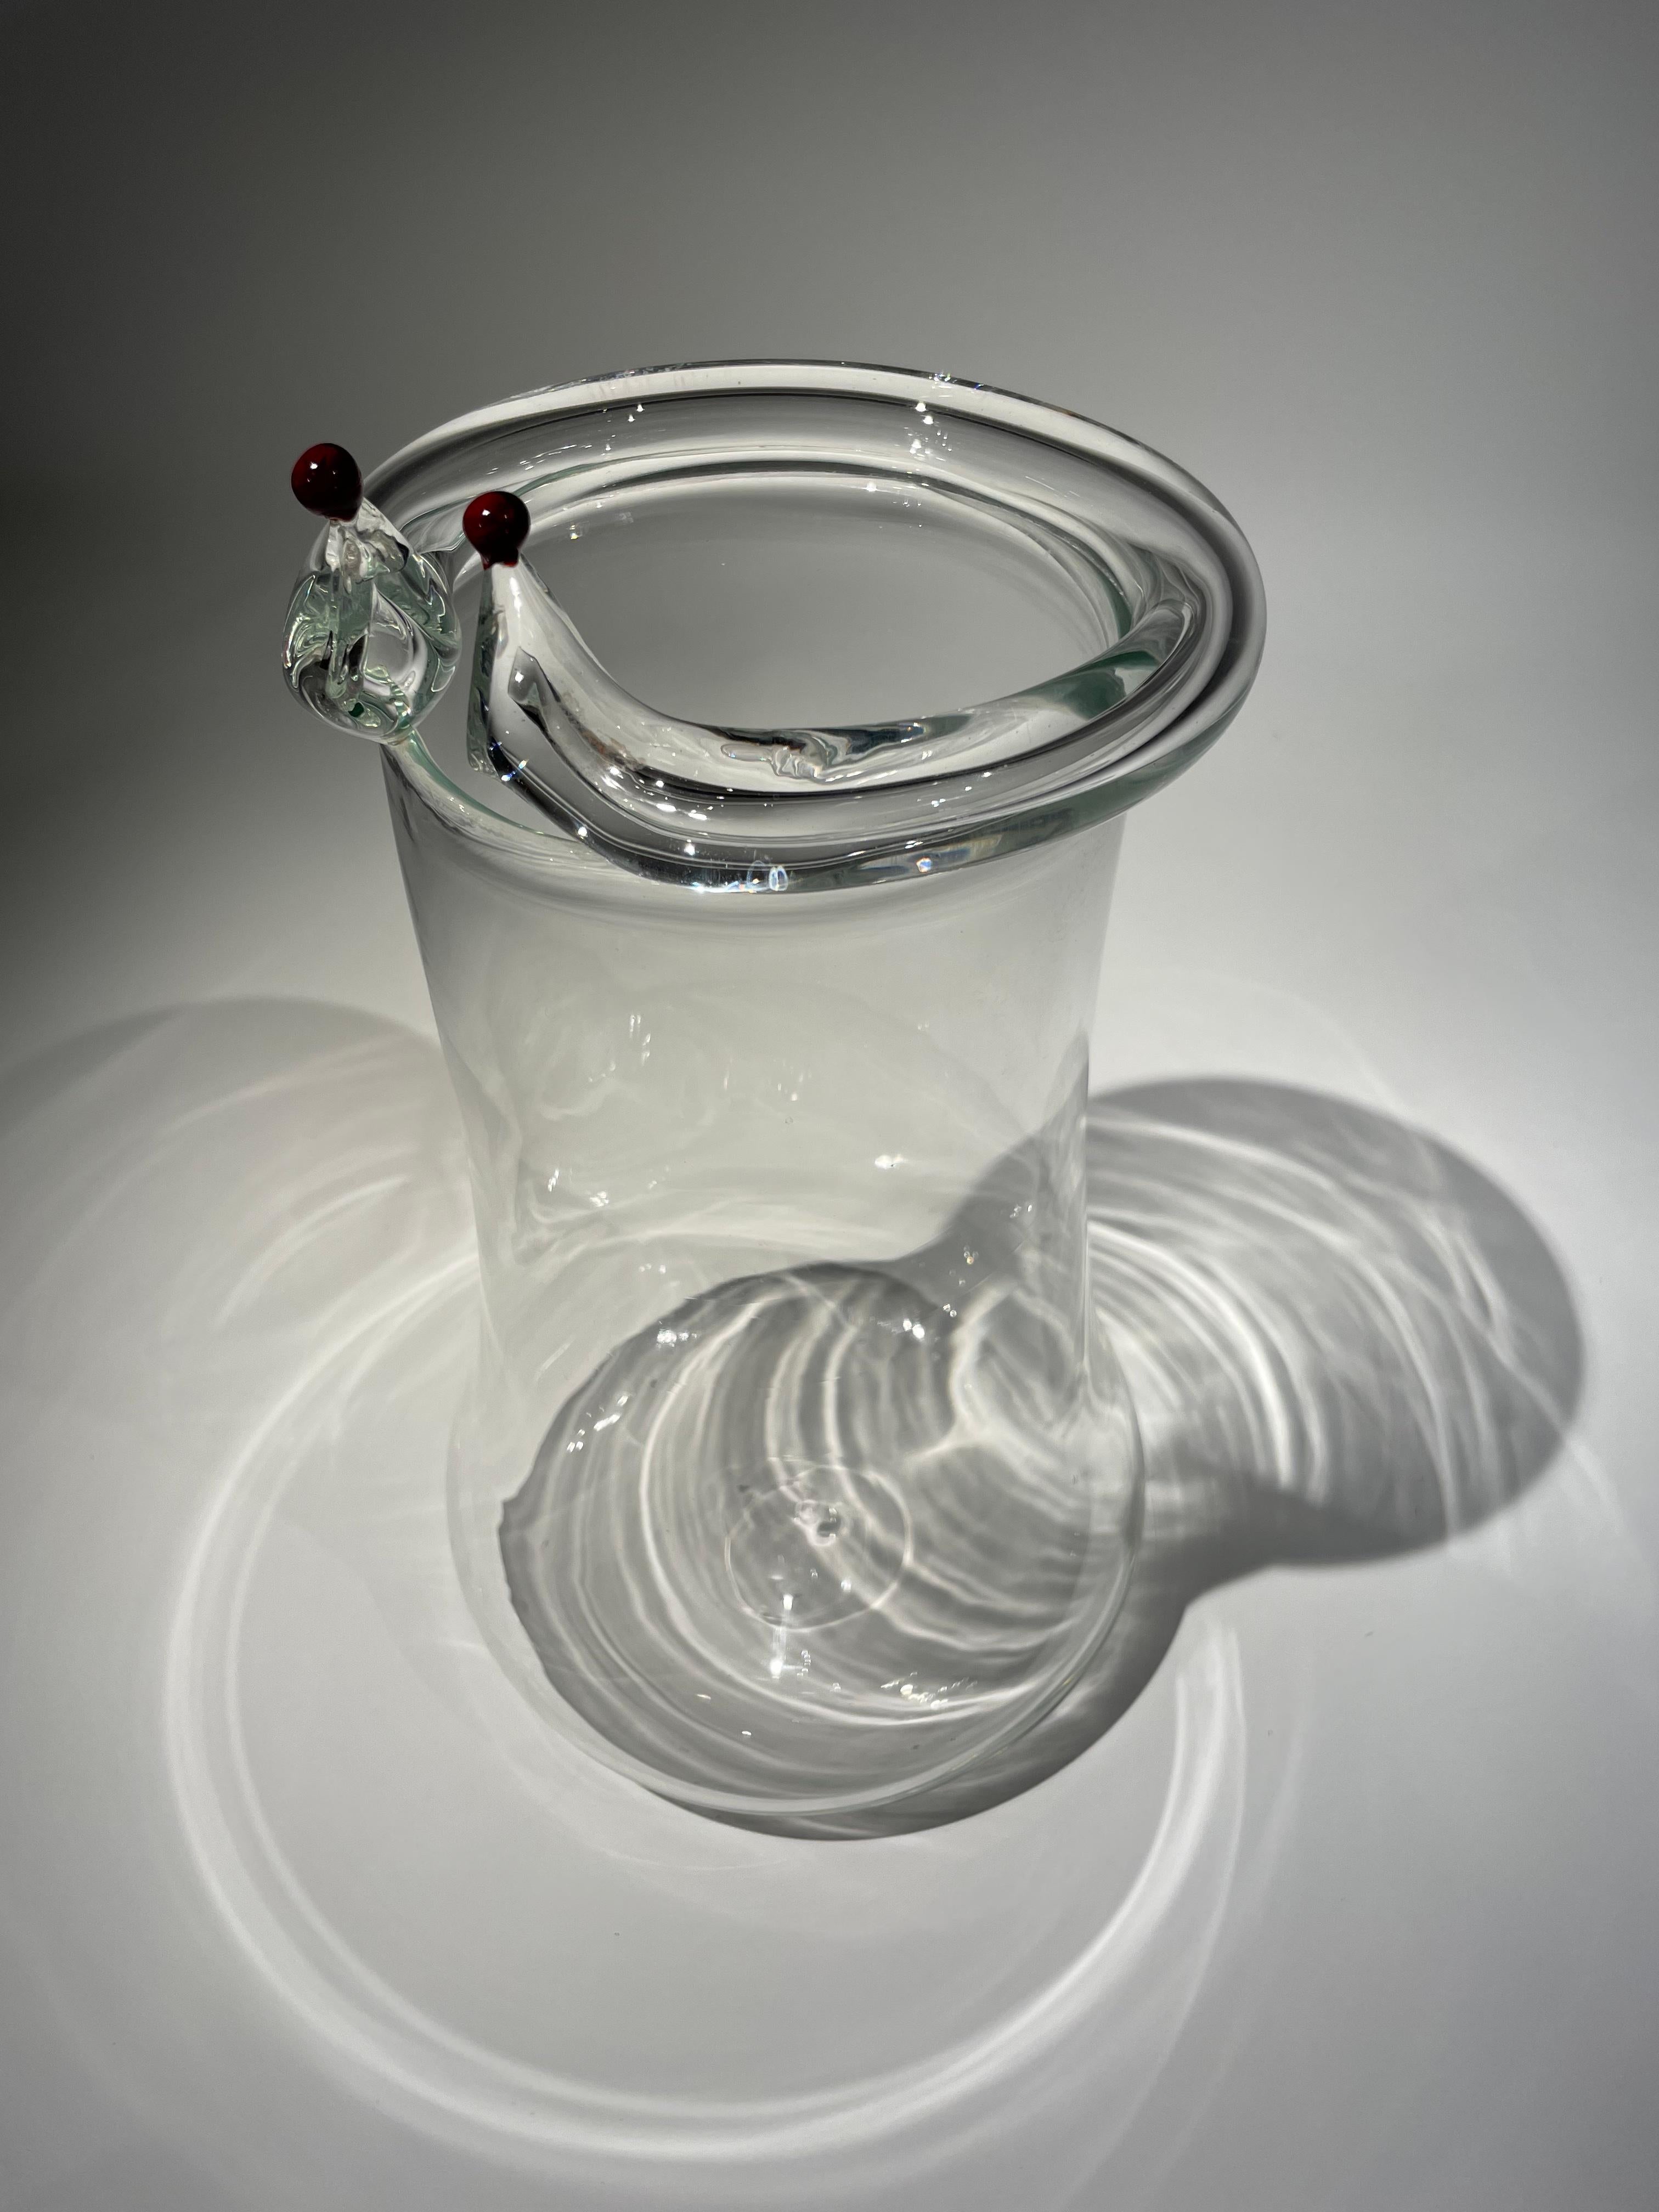 Introducing the stunning TITO glass design, crafted by the renowned designer Renato Toso from the new generation of designers in Murano. The '70s inspired linear and transparent design is both essential and eye-catching, making it a perfect addition